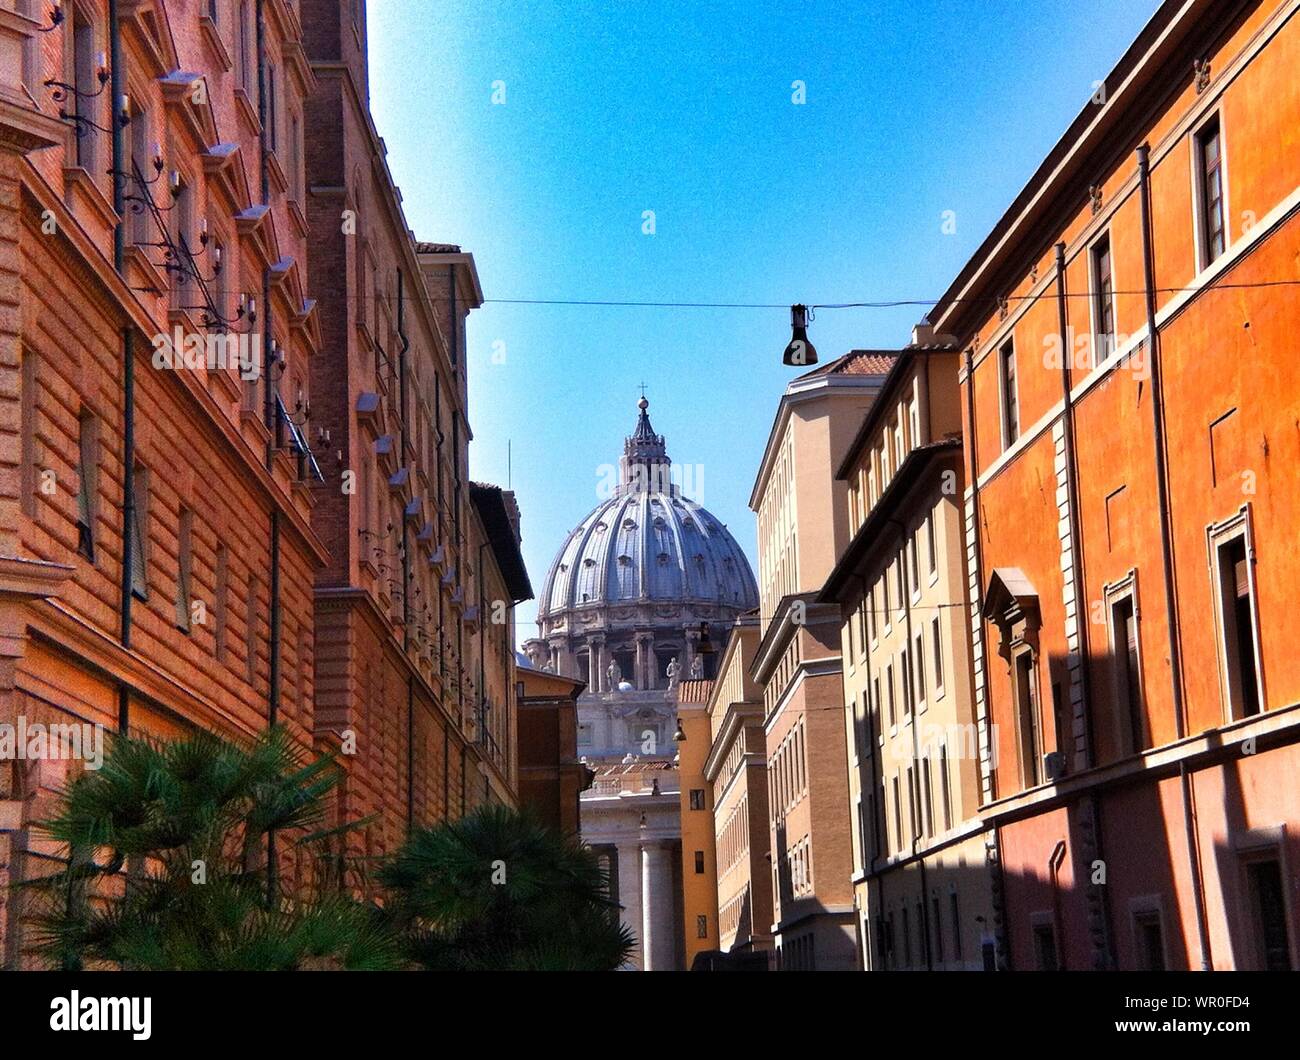 Side View Of Buildings Against Domed Structure Stock Photo